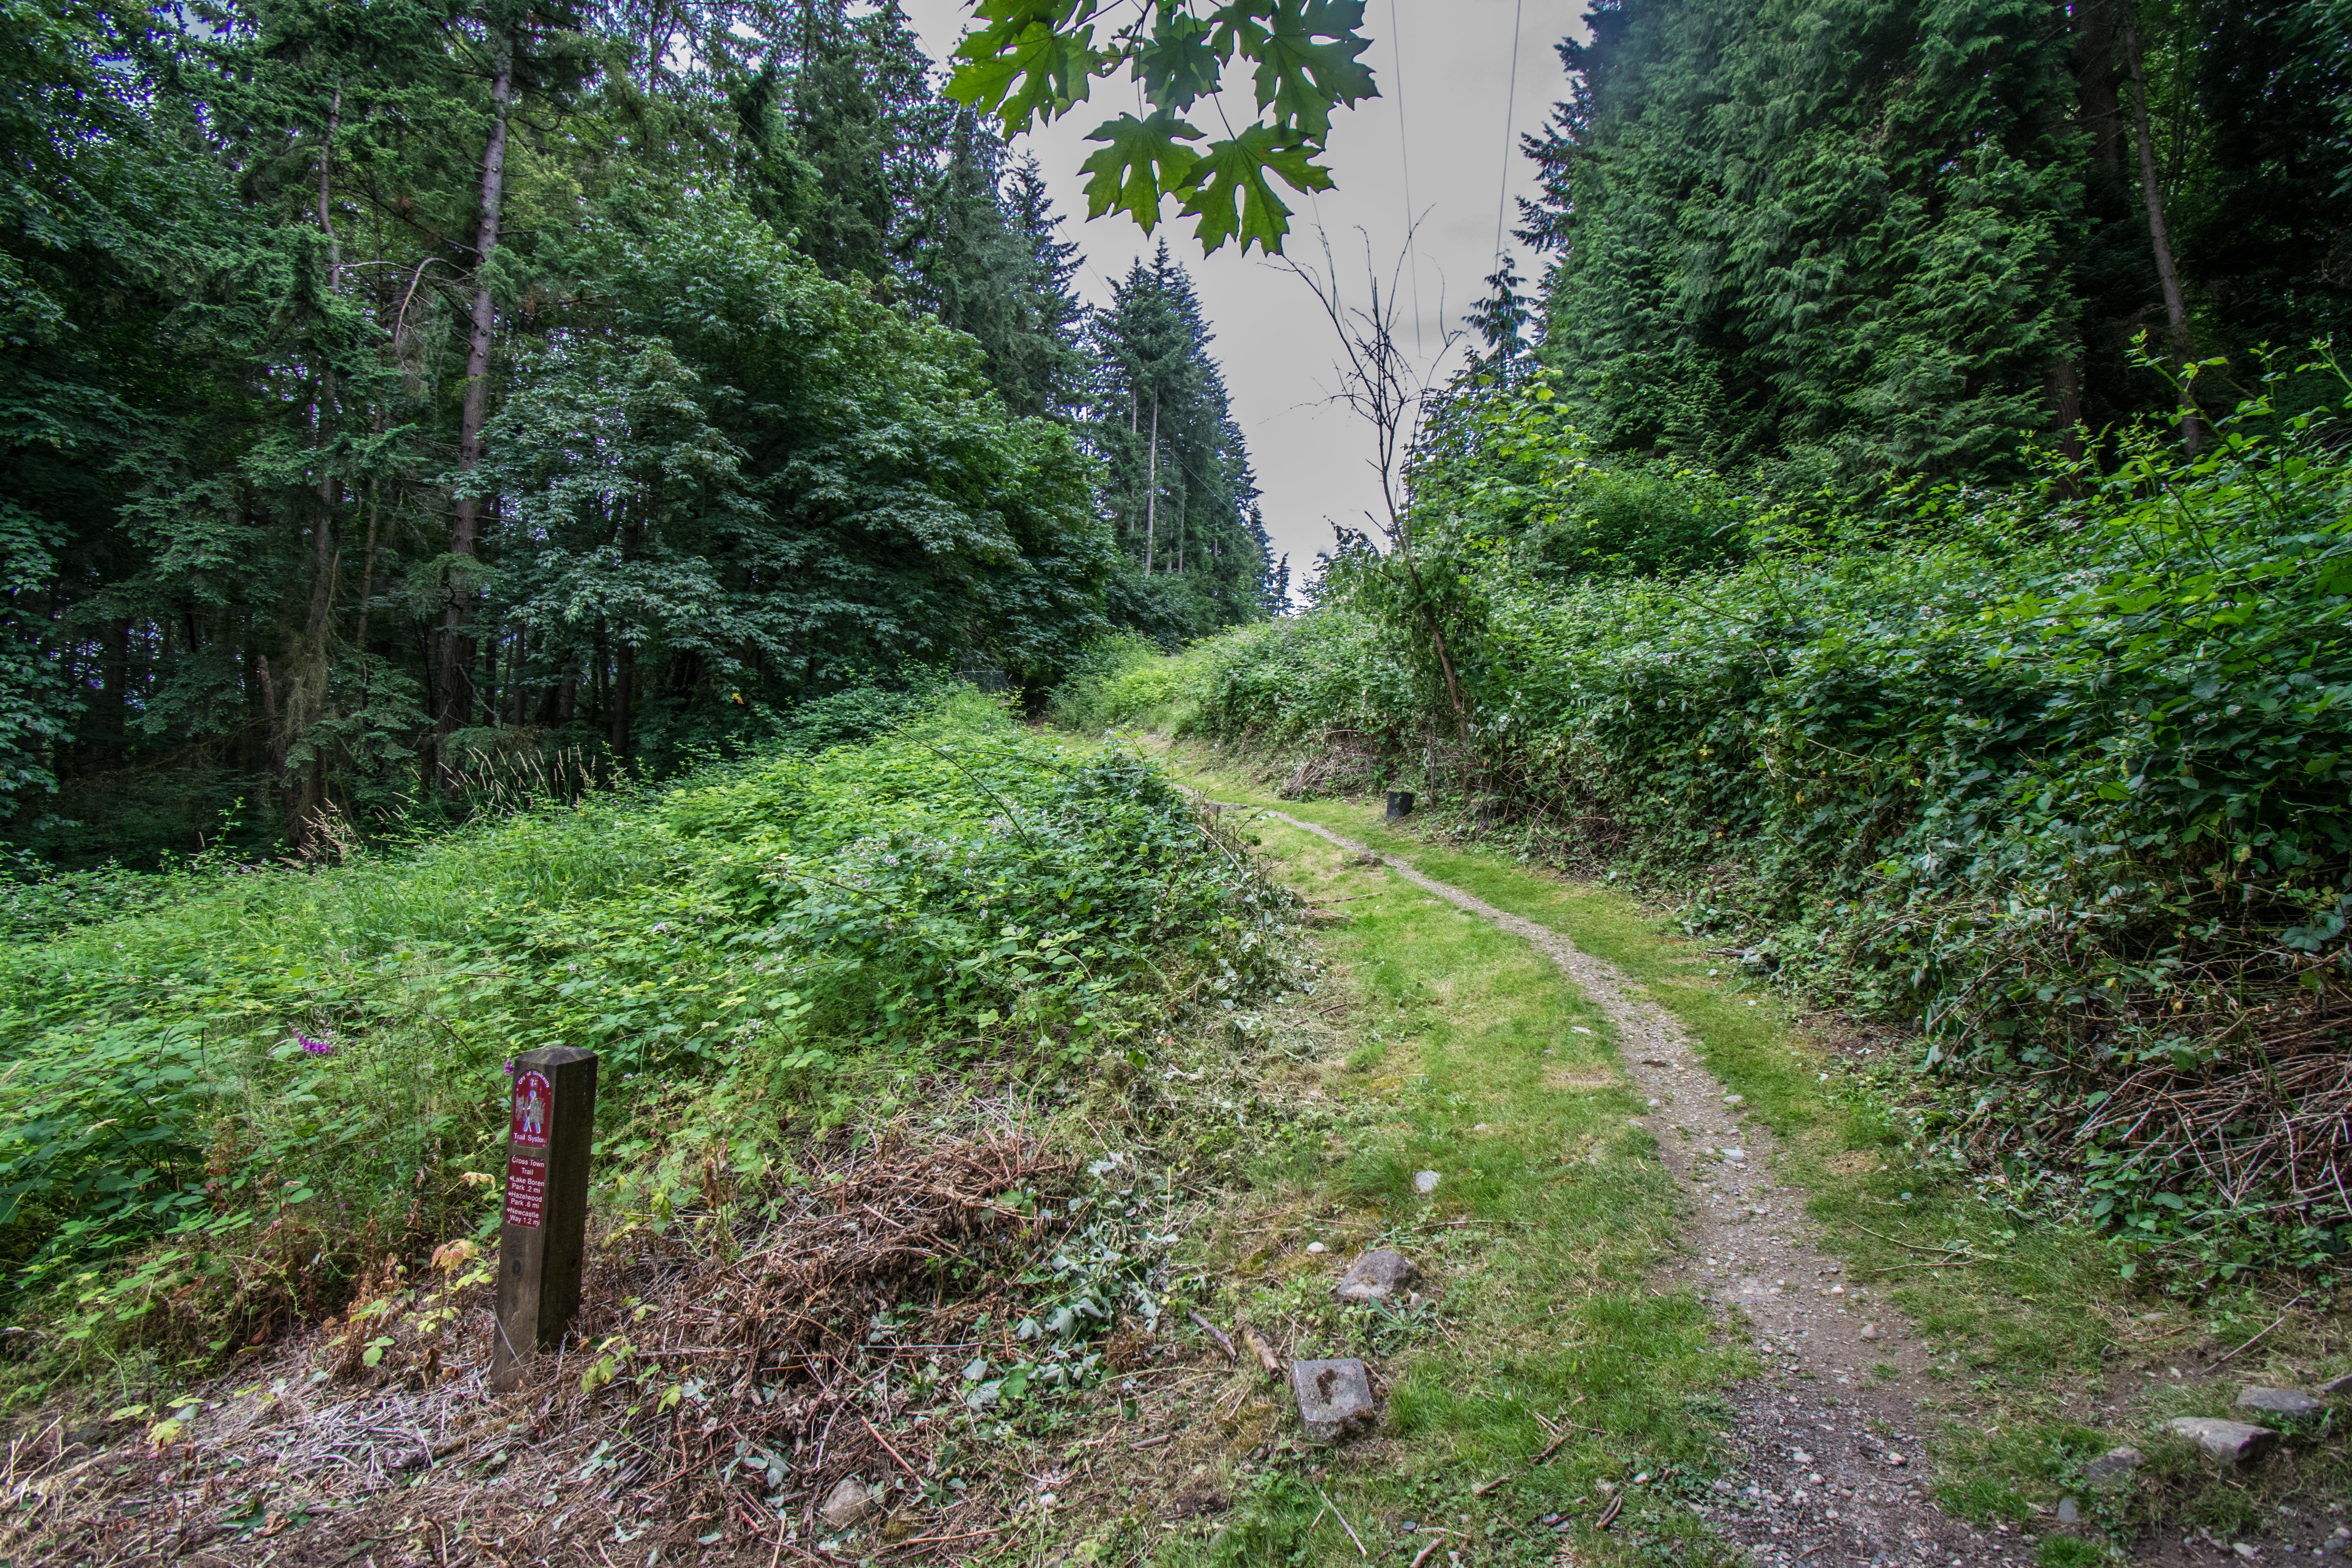 ../images/trails/crosstown_west//20 View of Olympus Trail looking south.jpg